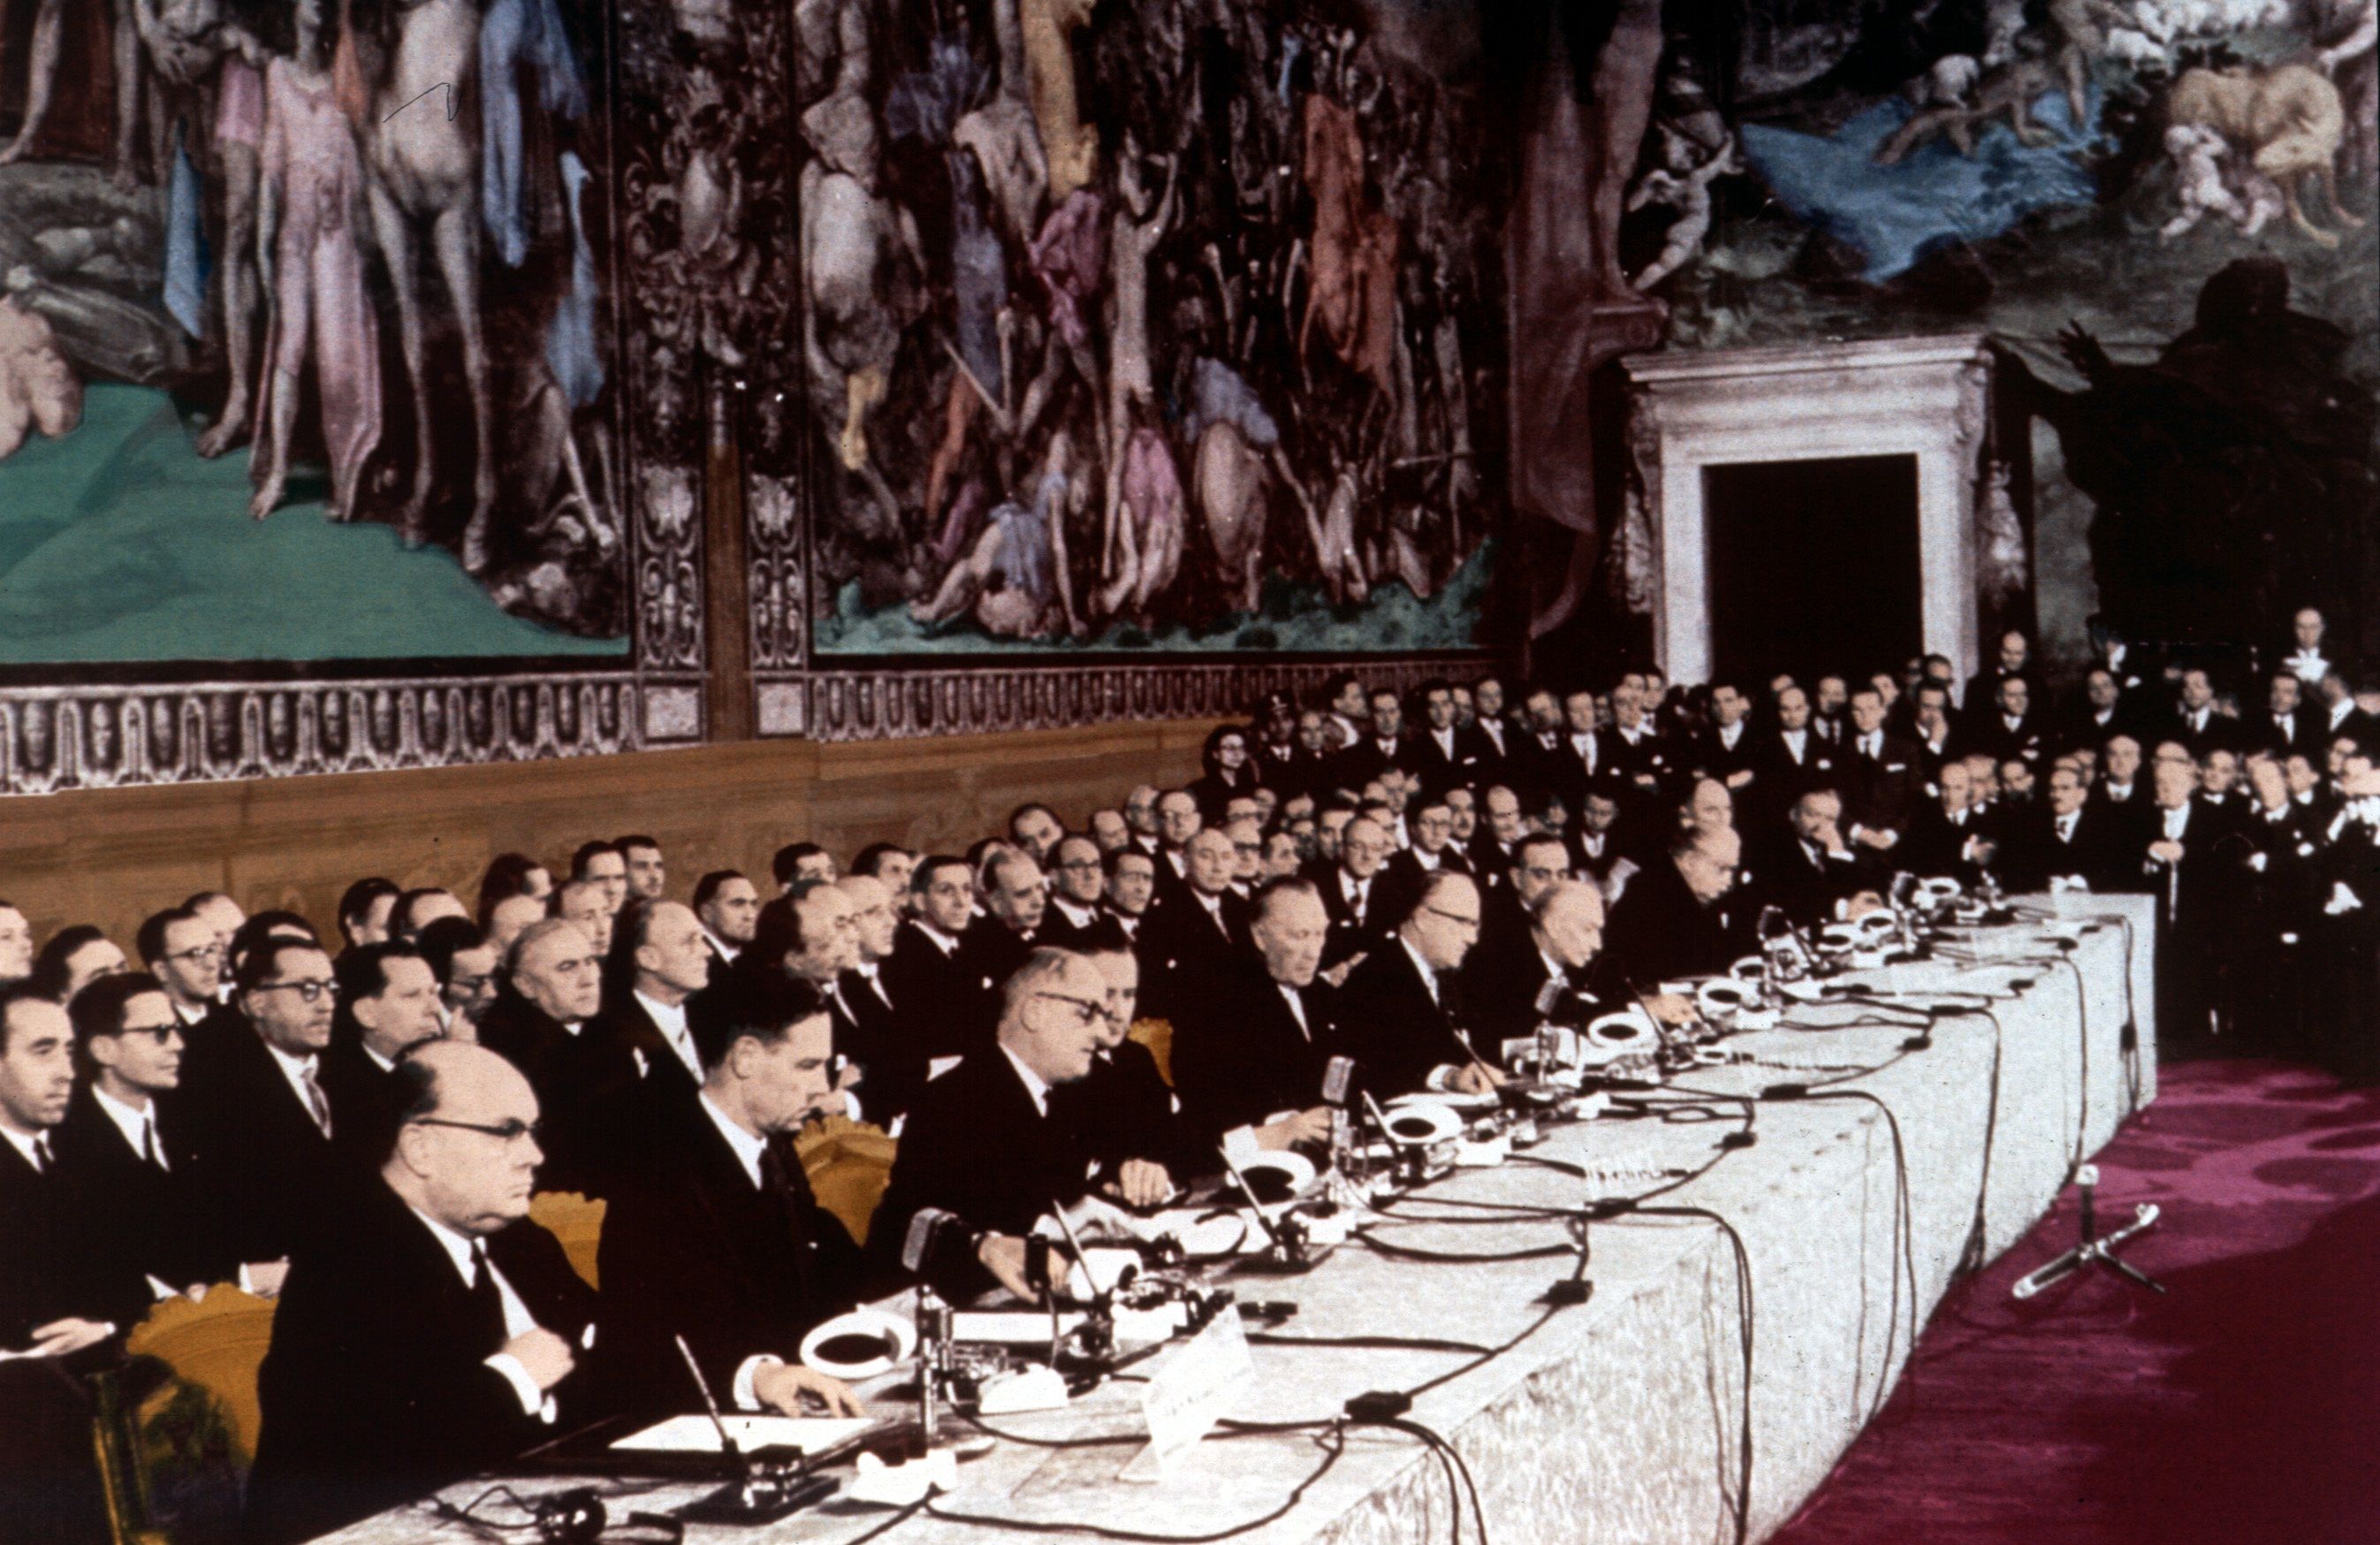 The 1957 Treaties of Rome signing ceremony. Italy is a founding member of the European Union.